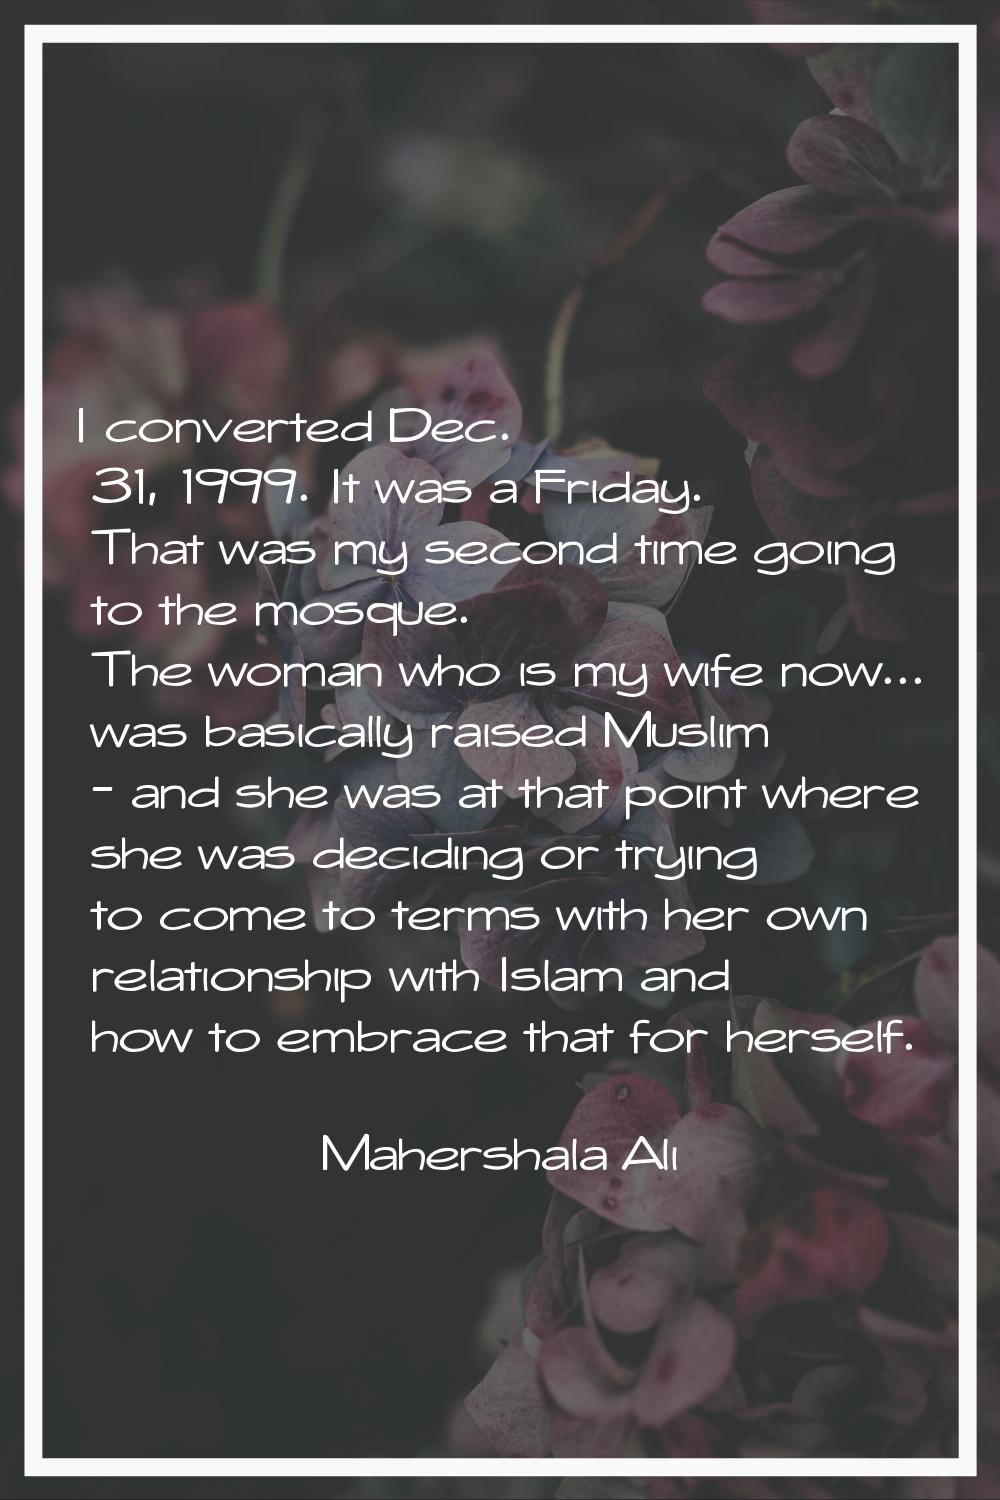 I converted Dec. 31, 1999. It was a Friday. That was my second time going to the mosque. The woman 